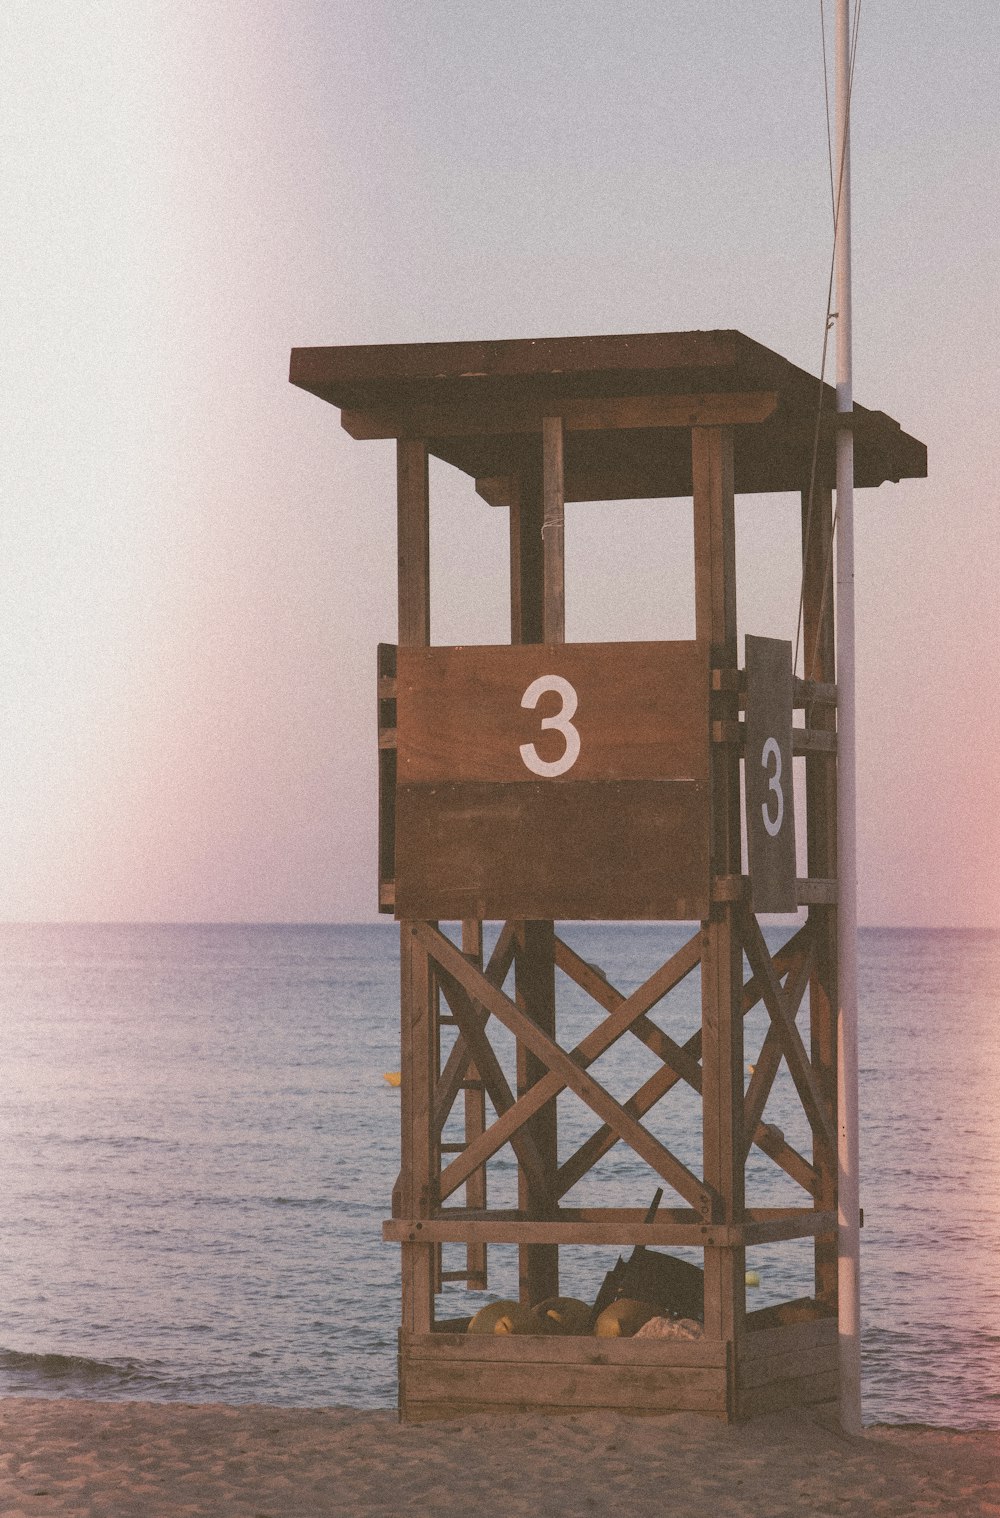 a lifeguard tower on the beach with the number 3 on it